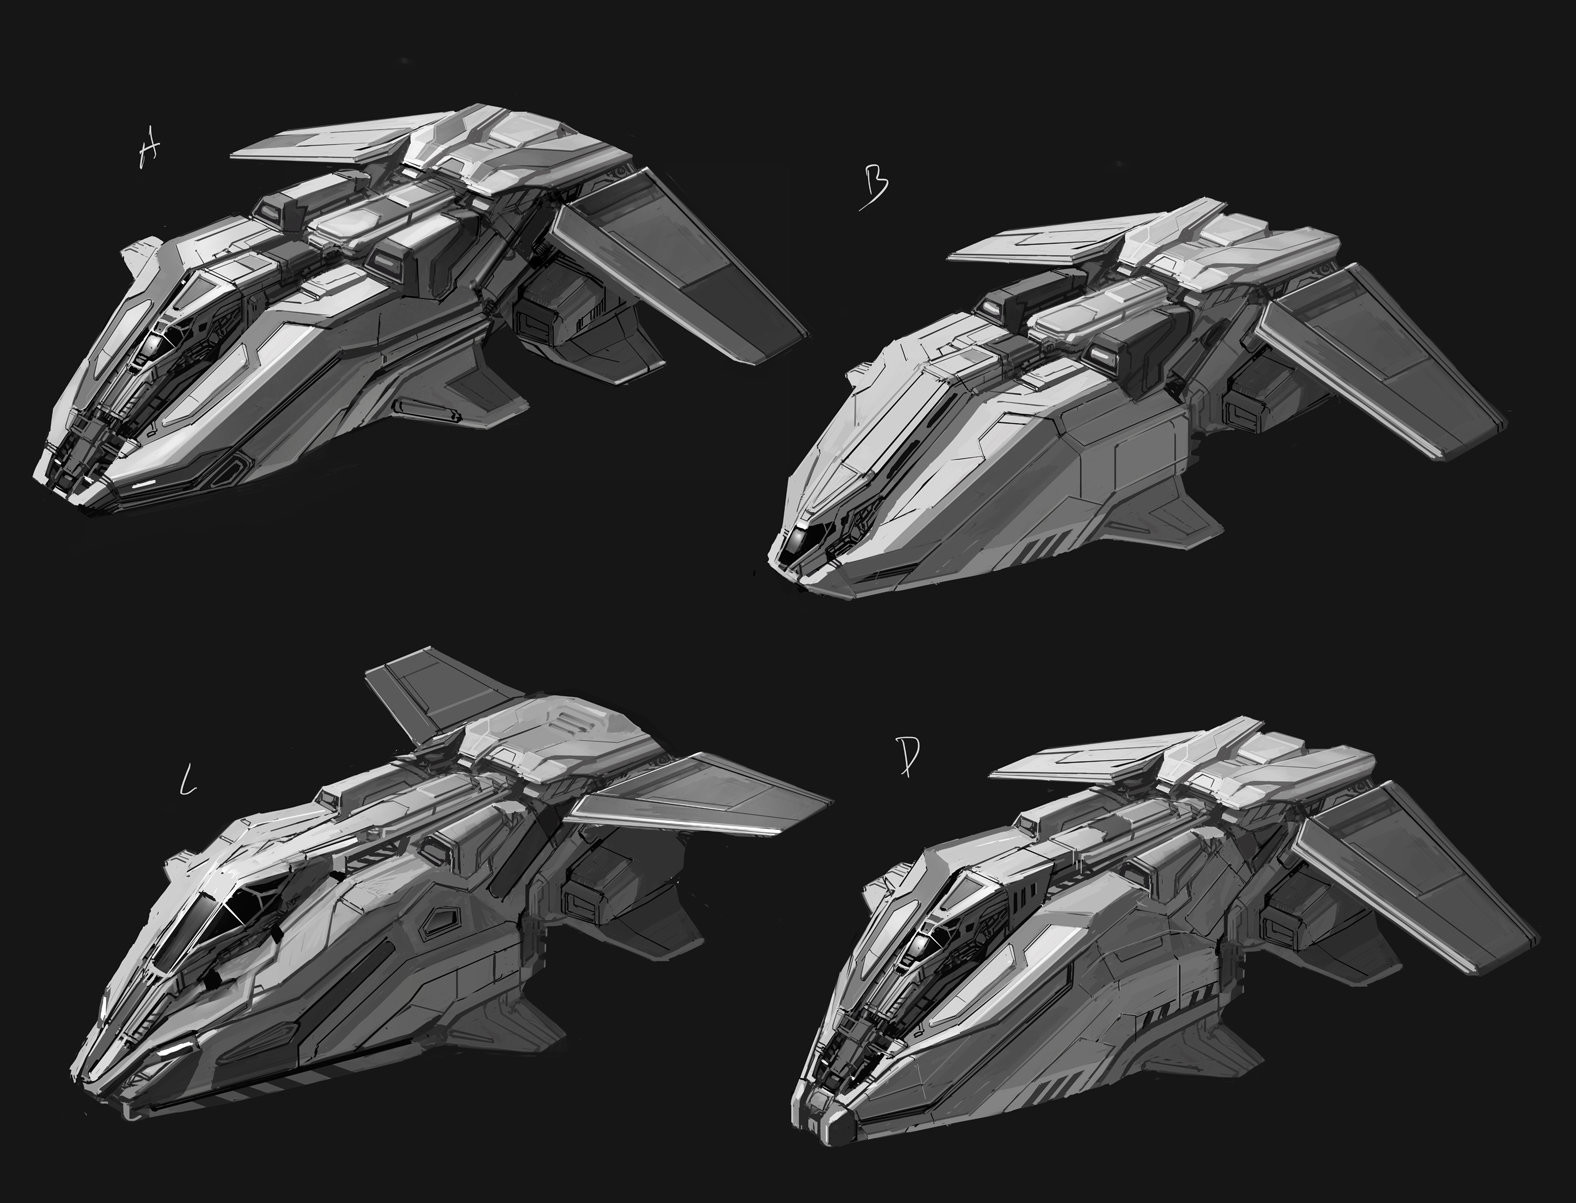 LEWIS FISCHER - Classic craft / Ships designs for Elite Dangerous Game